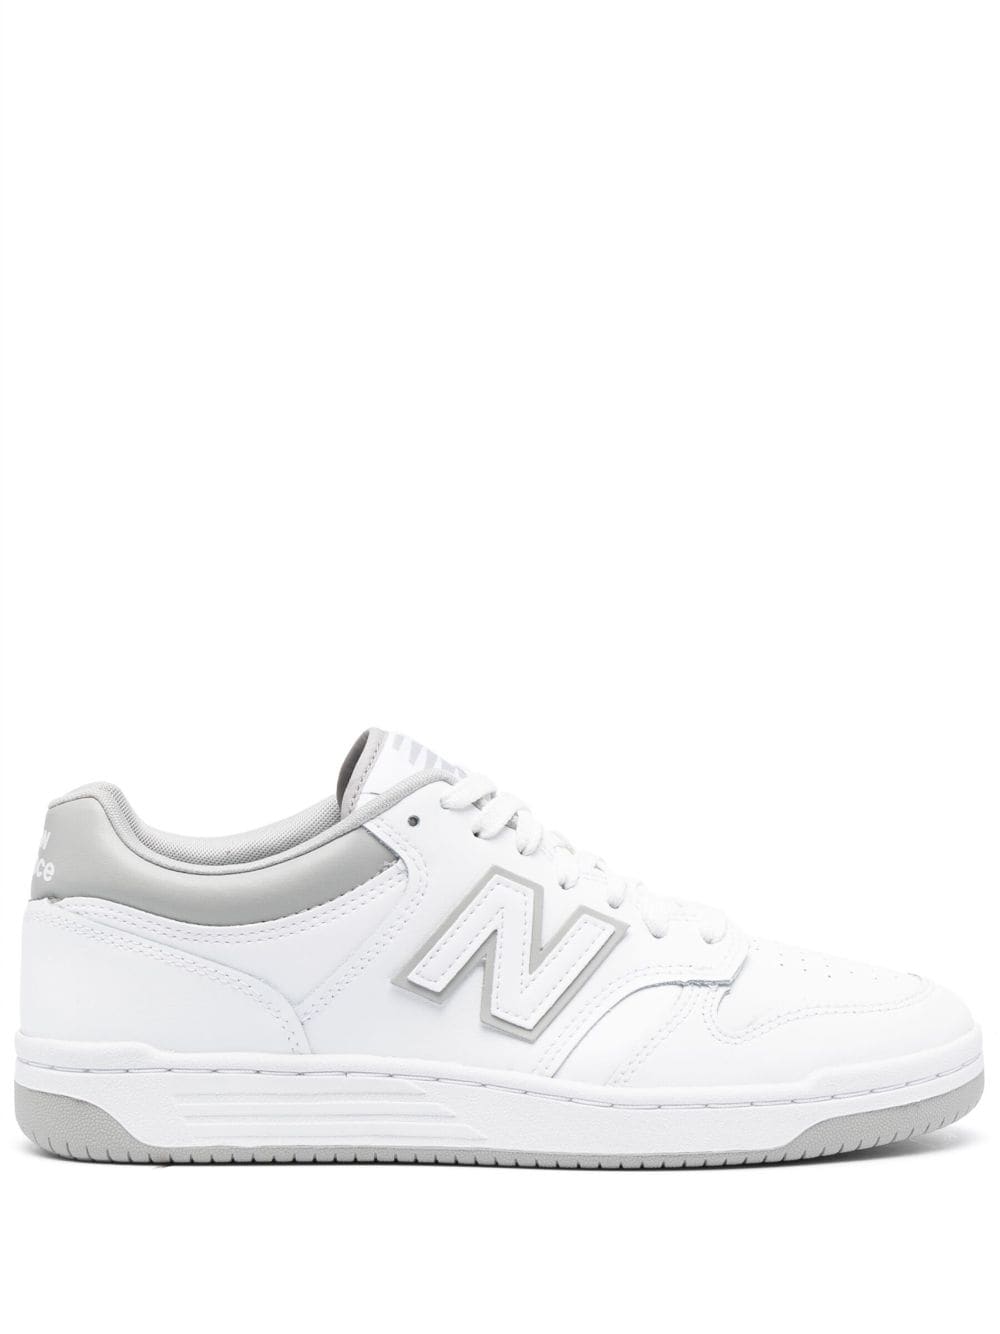 New Balance 480 low-top sneakers - White